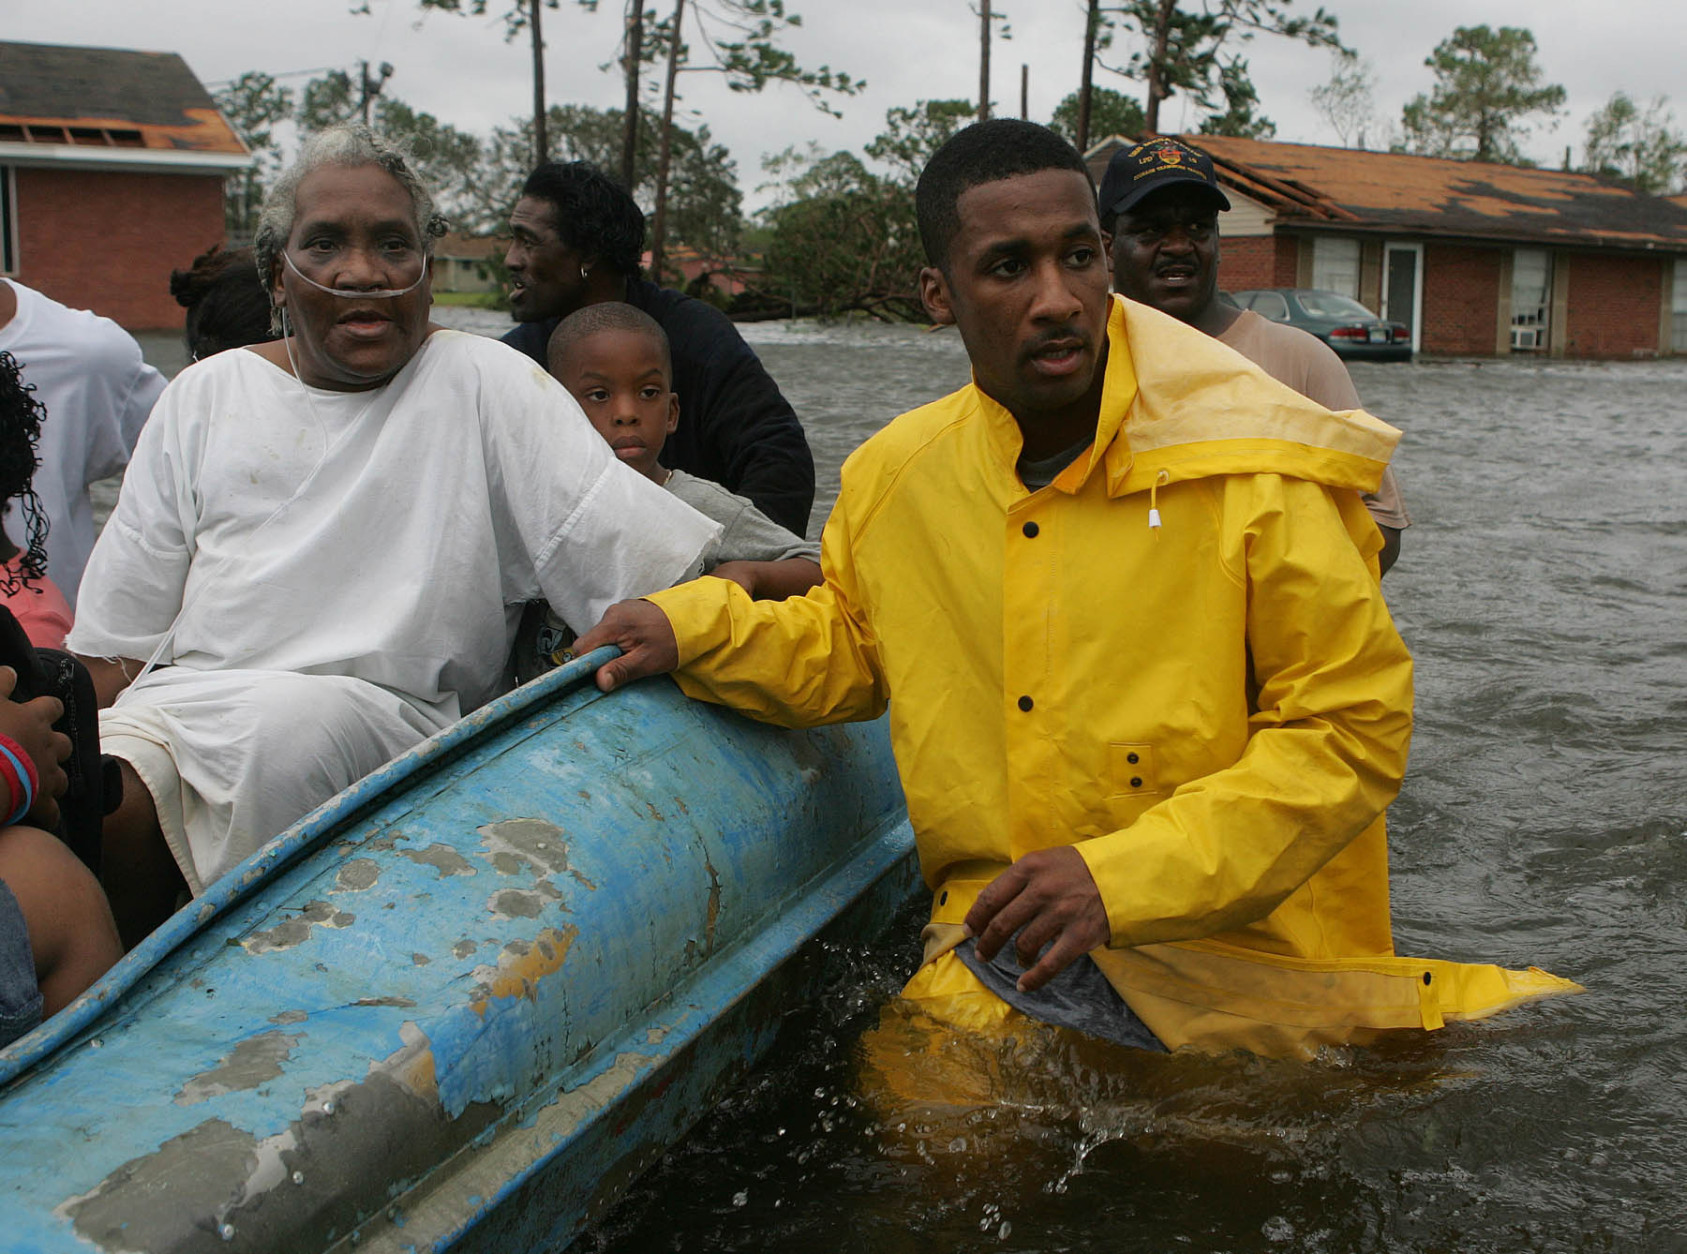 Gulfport Miss. Police Officer Terrence Gray, right, helps evacuate Lovie Mae Allen and group of children from their flooded homes after Hurricane Katrina struck the Gulf Coast Monday,  Aug. 29, 2005 in Gulfport, Miss. (AP Photo/John Bazemore)